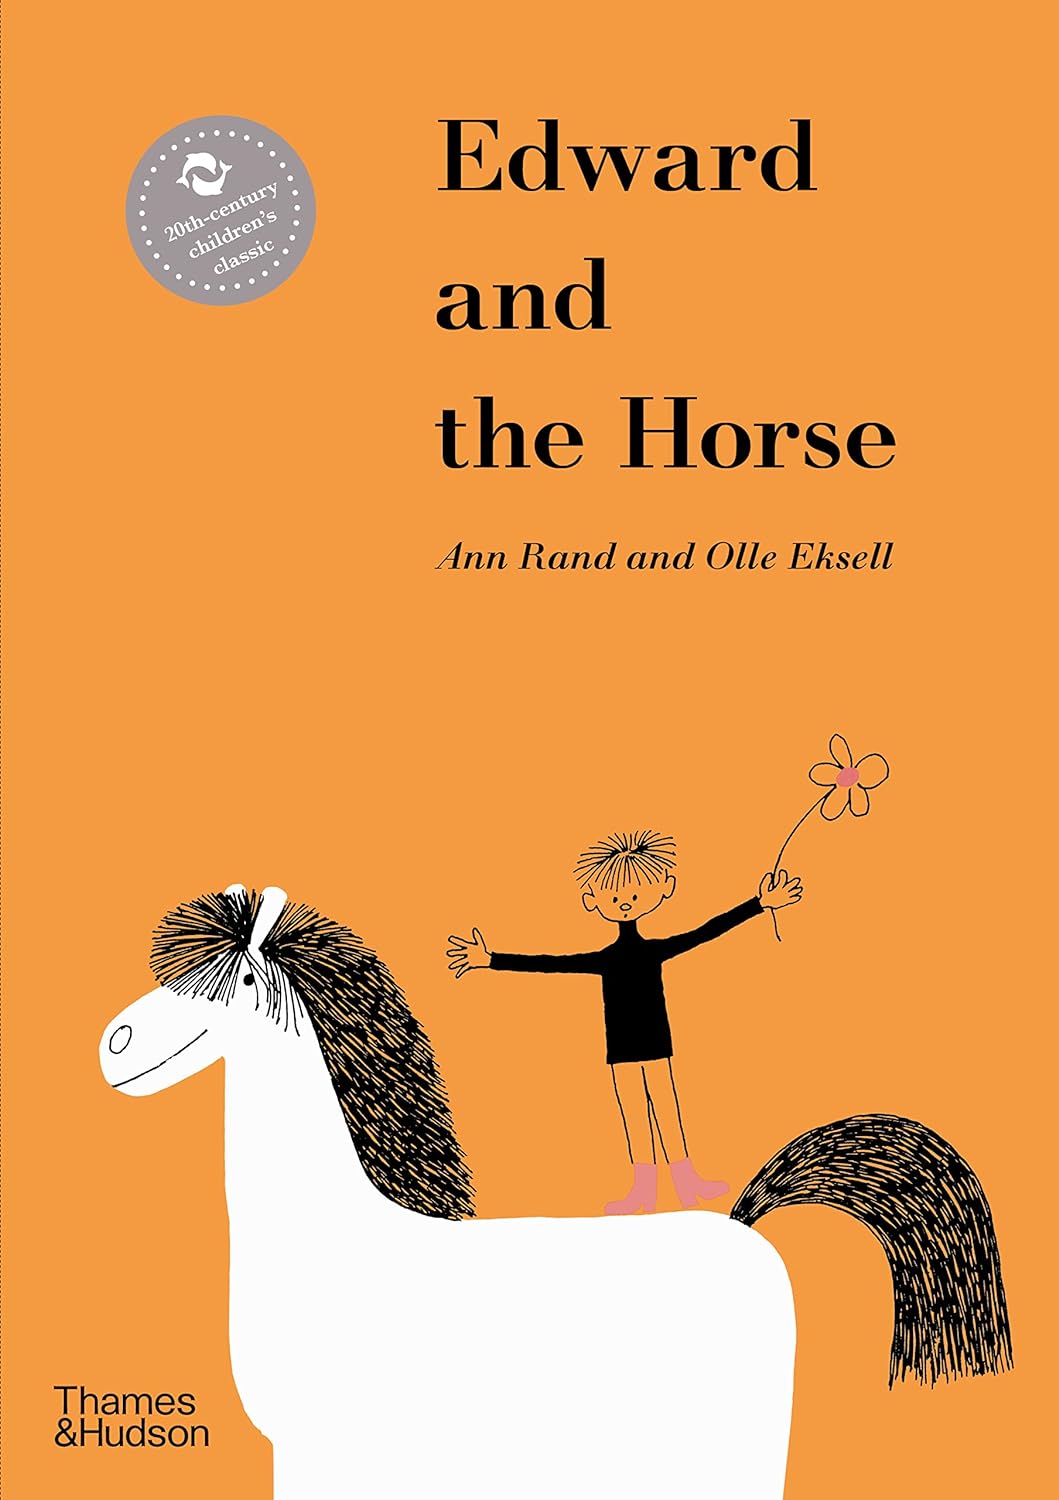 Ann Rand and Olle Eksell: Edward and the Horse